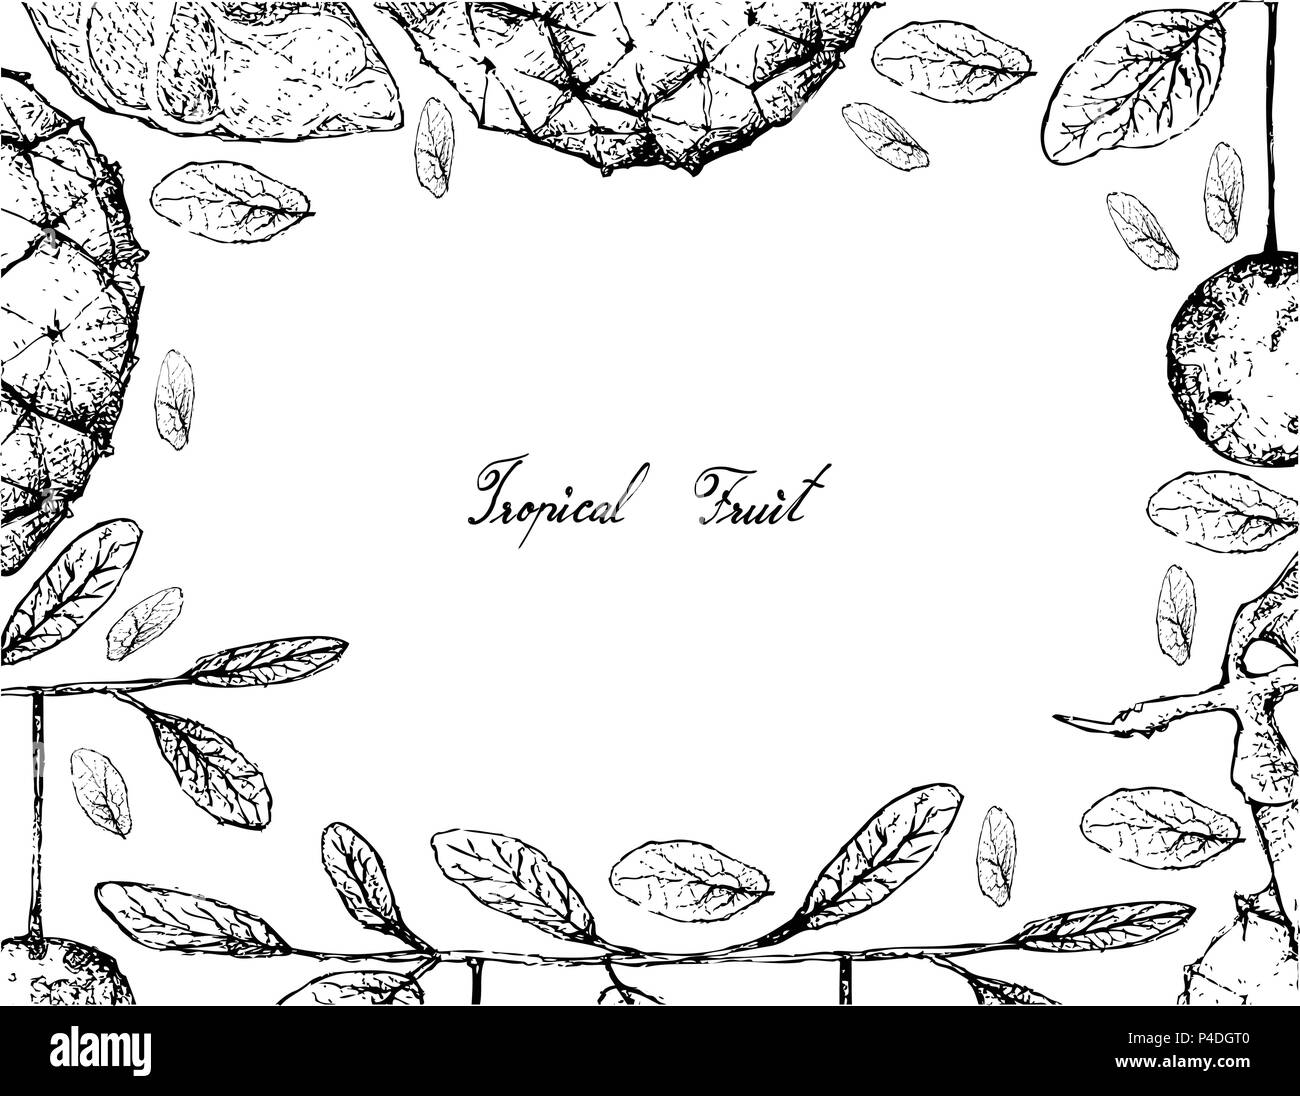 Tropical Fruit, Illustration Frame of Hand Drawn Sketch of Araticum or Duguetia Furfuracea and Diospyros Filipendula Fruits Isolated on White Backgrou Stock Vector